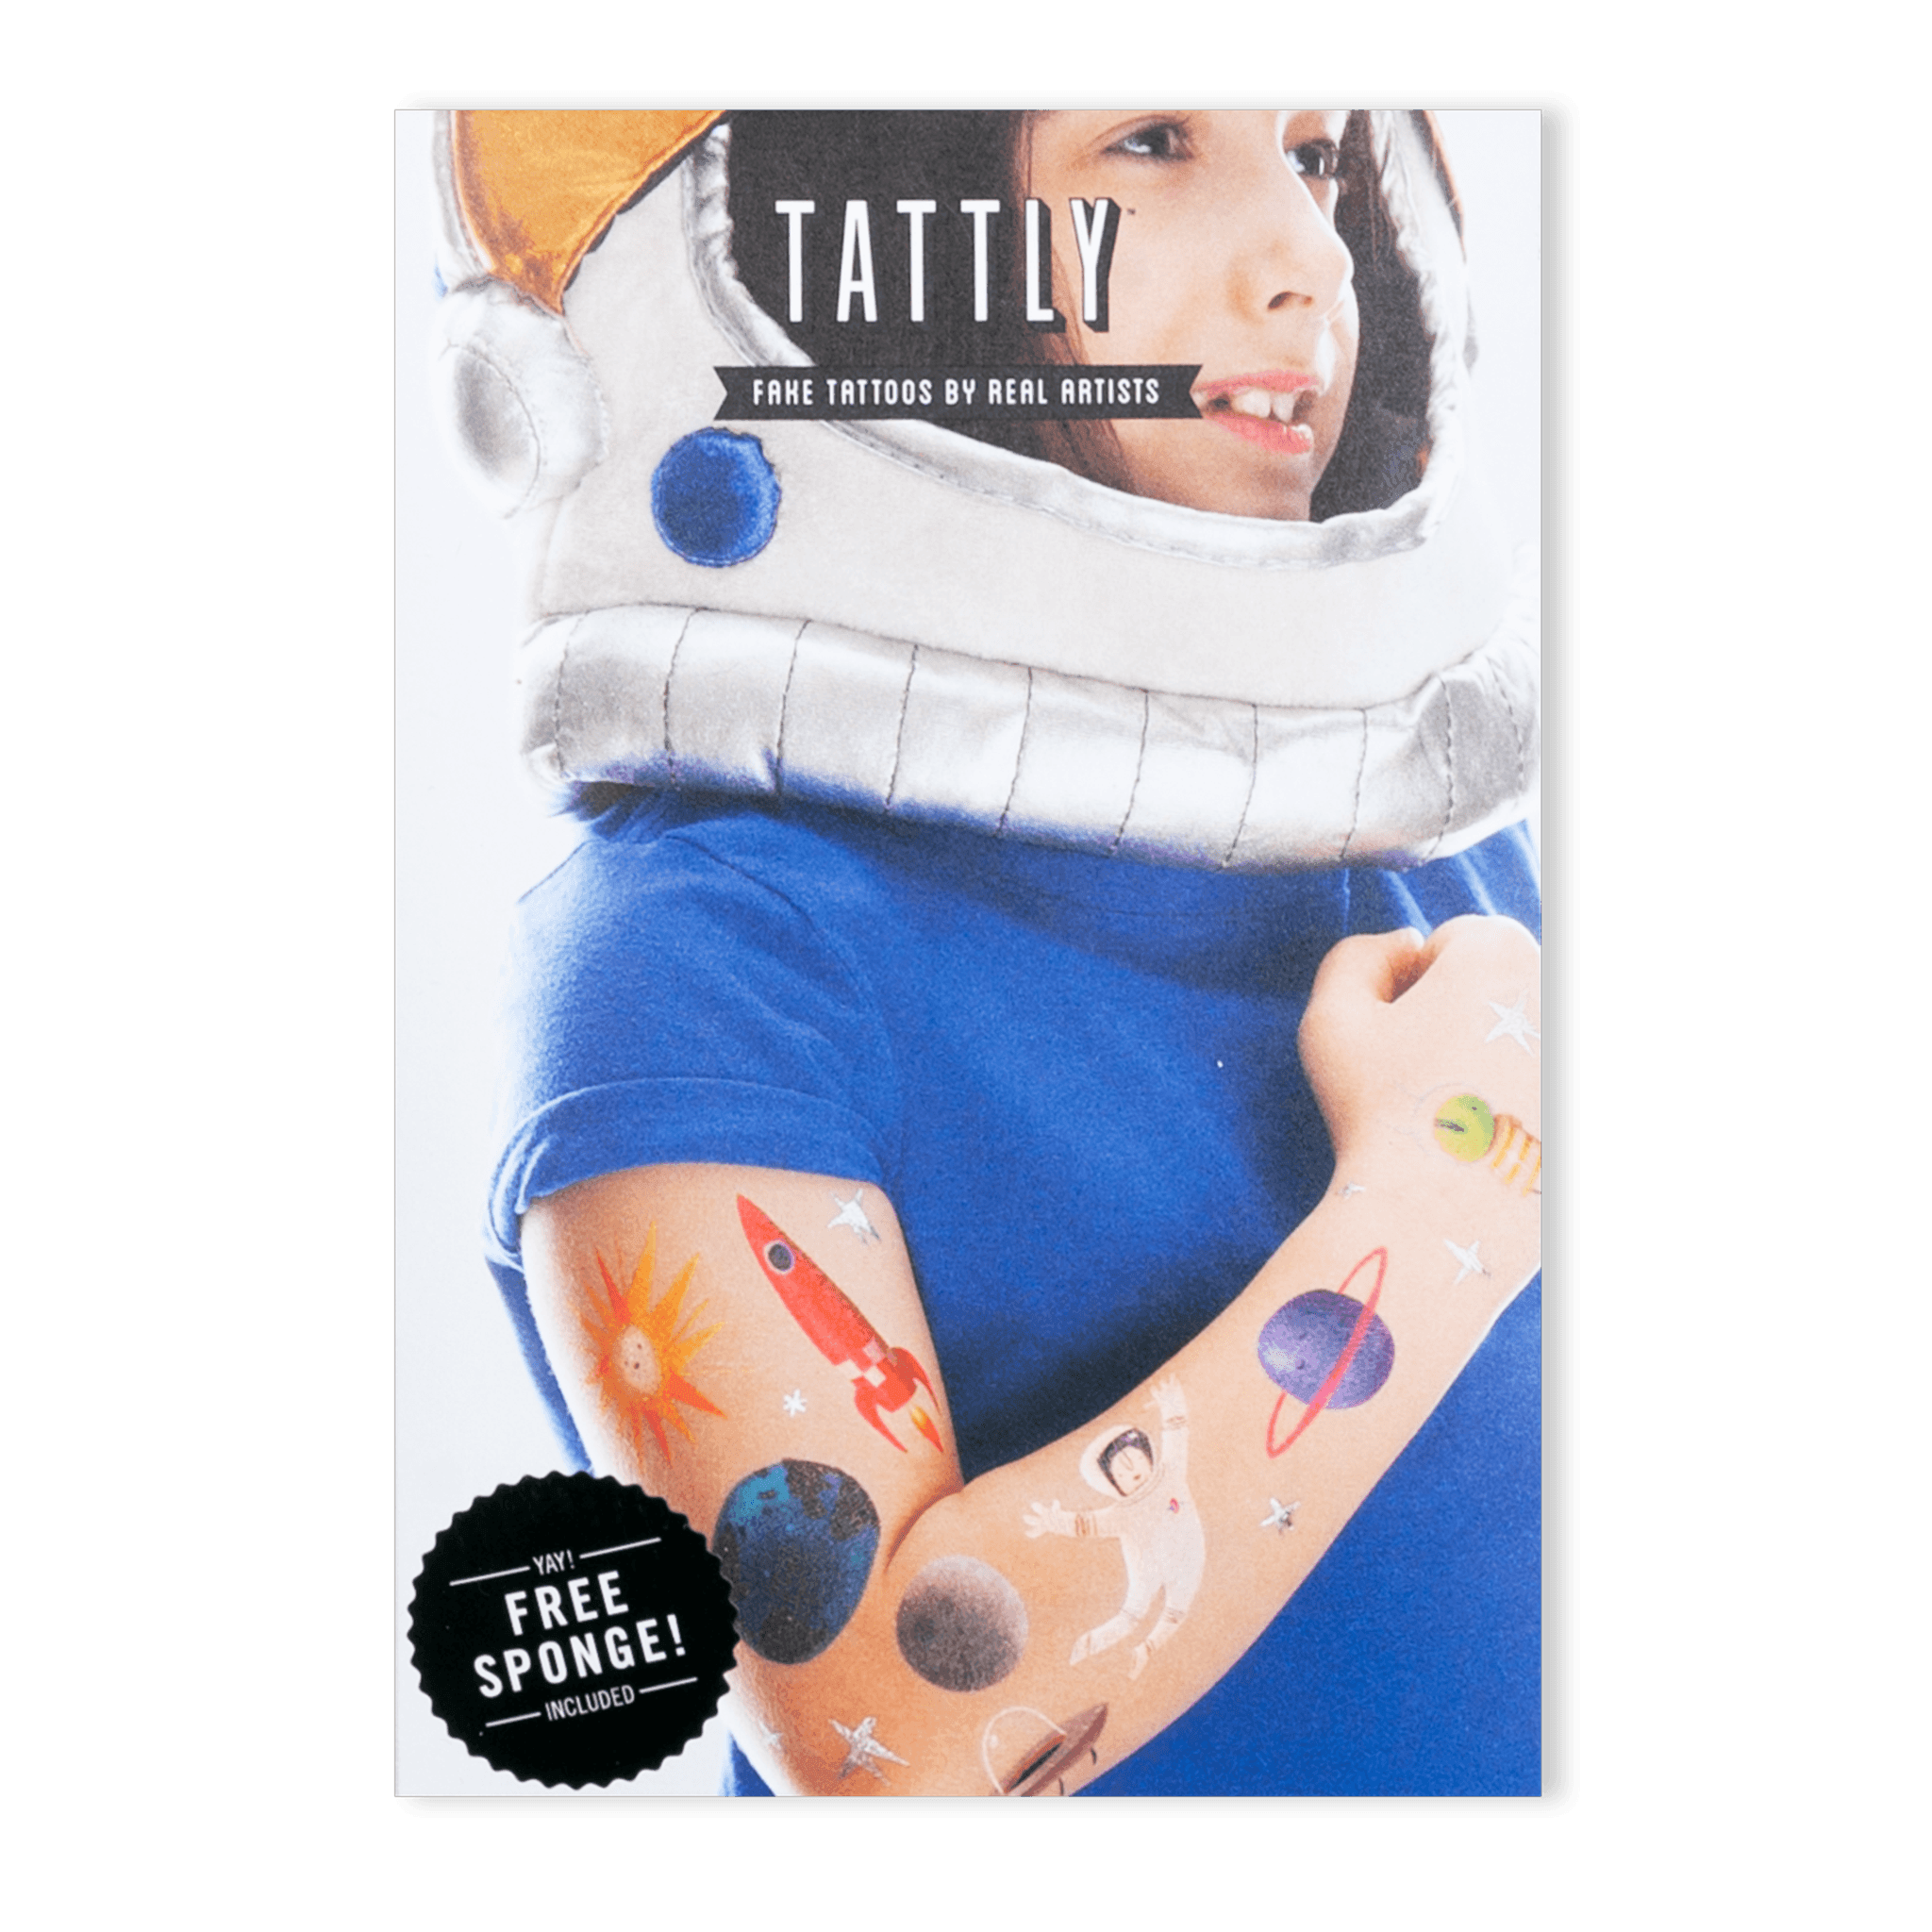 Space Explorer Tattoo Sheet, Set of 8 - Why and Whale